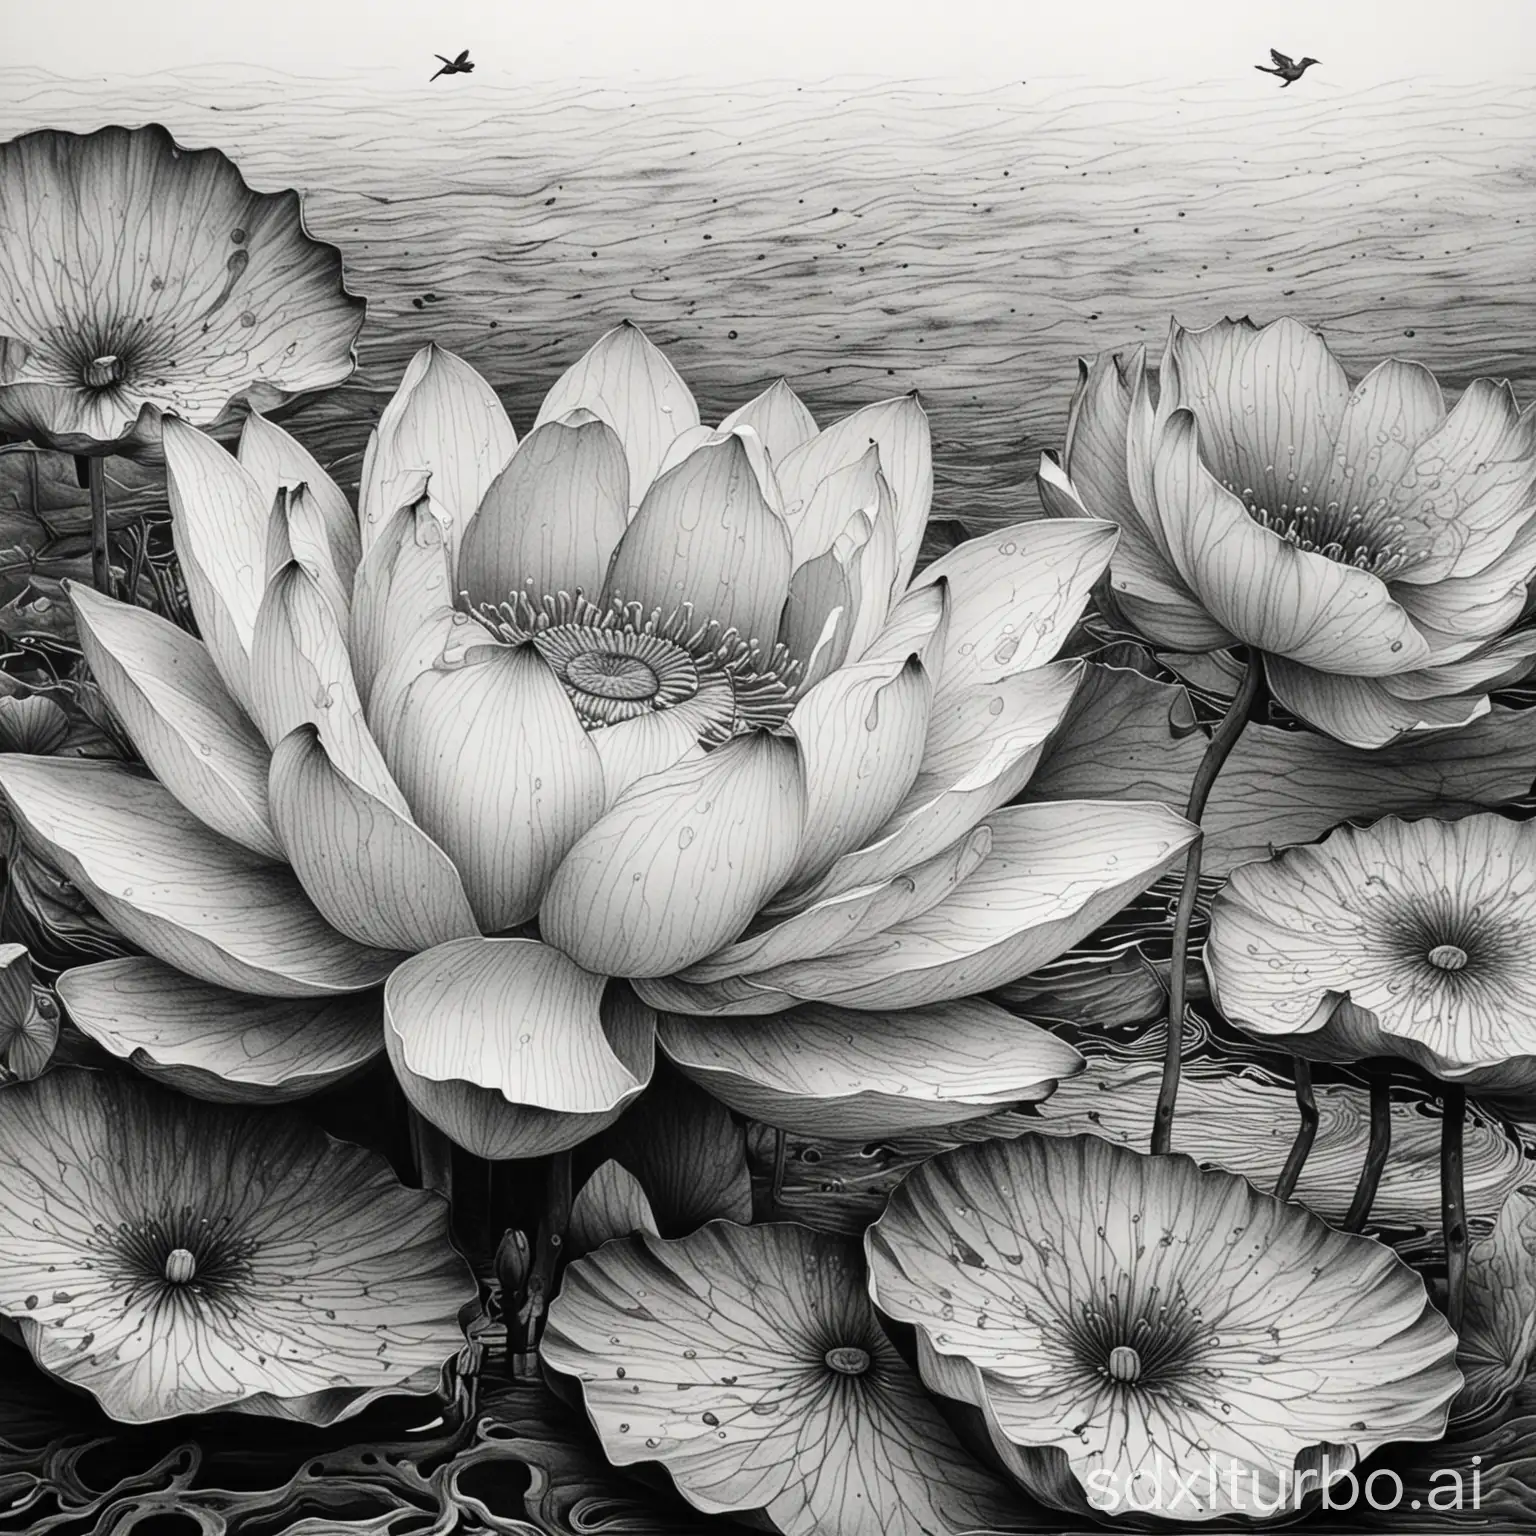 water flow, black and white simple pen drawings, line drawing, traditional art, lotus, bird's eye view